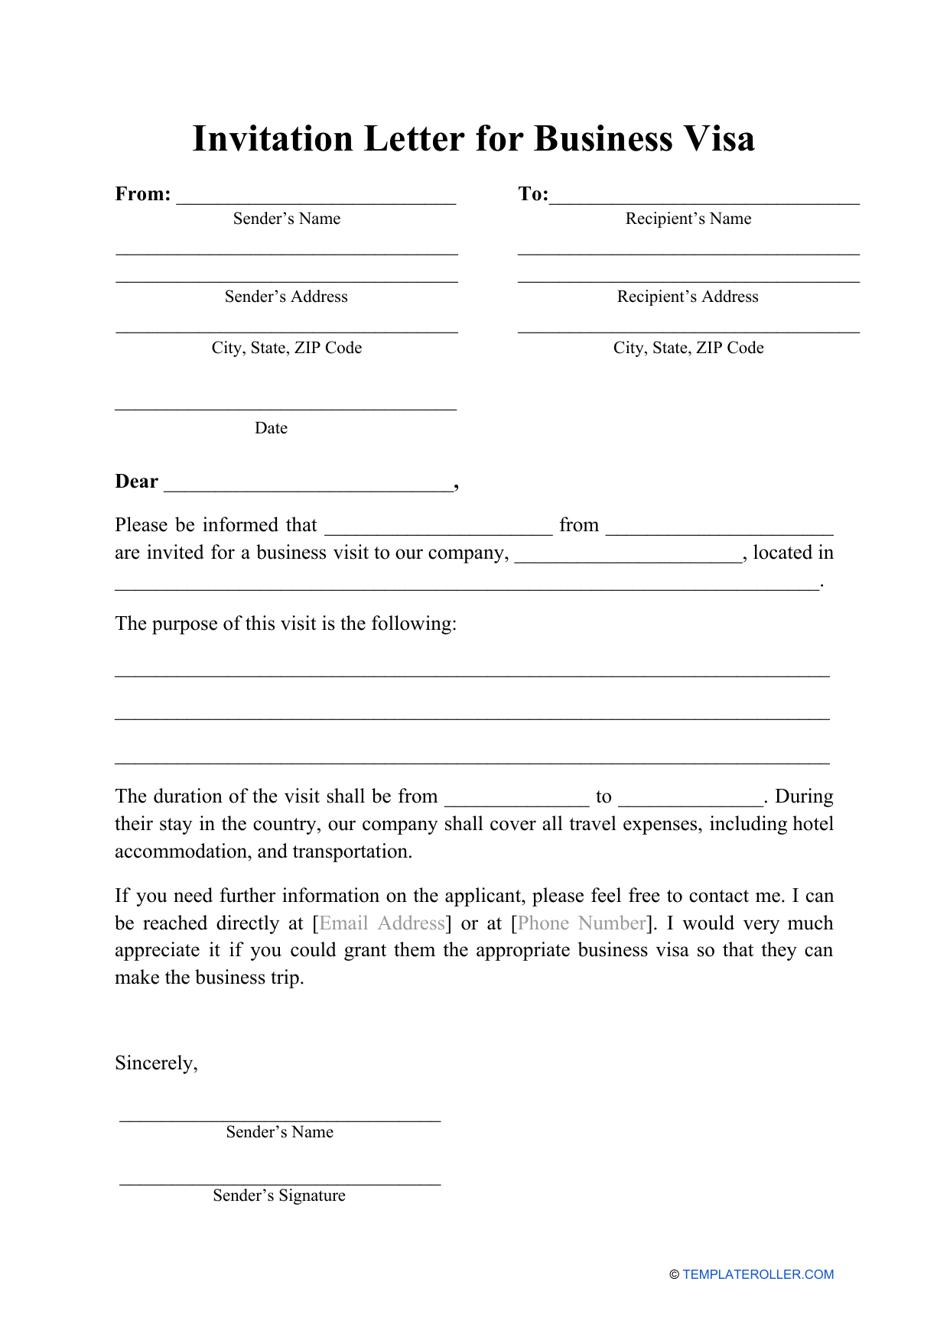 Invitation Letter for Business Visa Template, Page 1